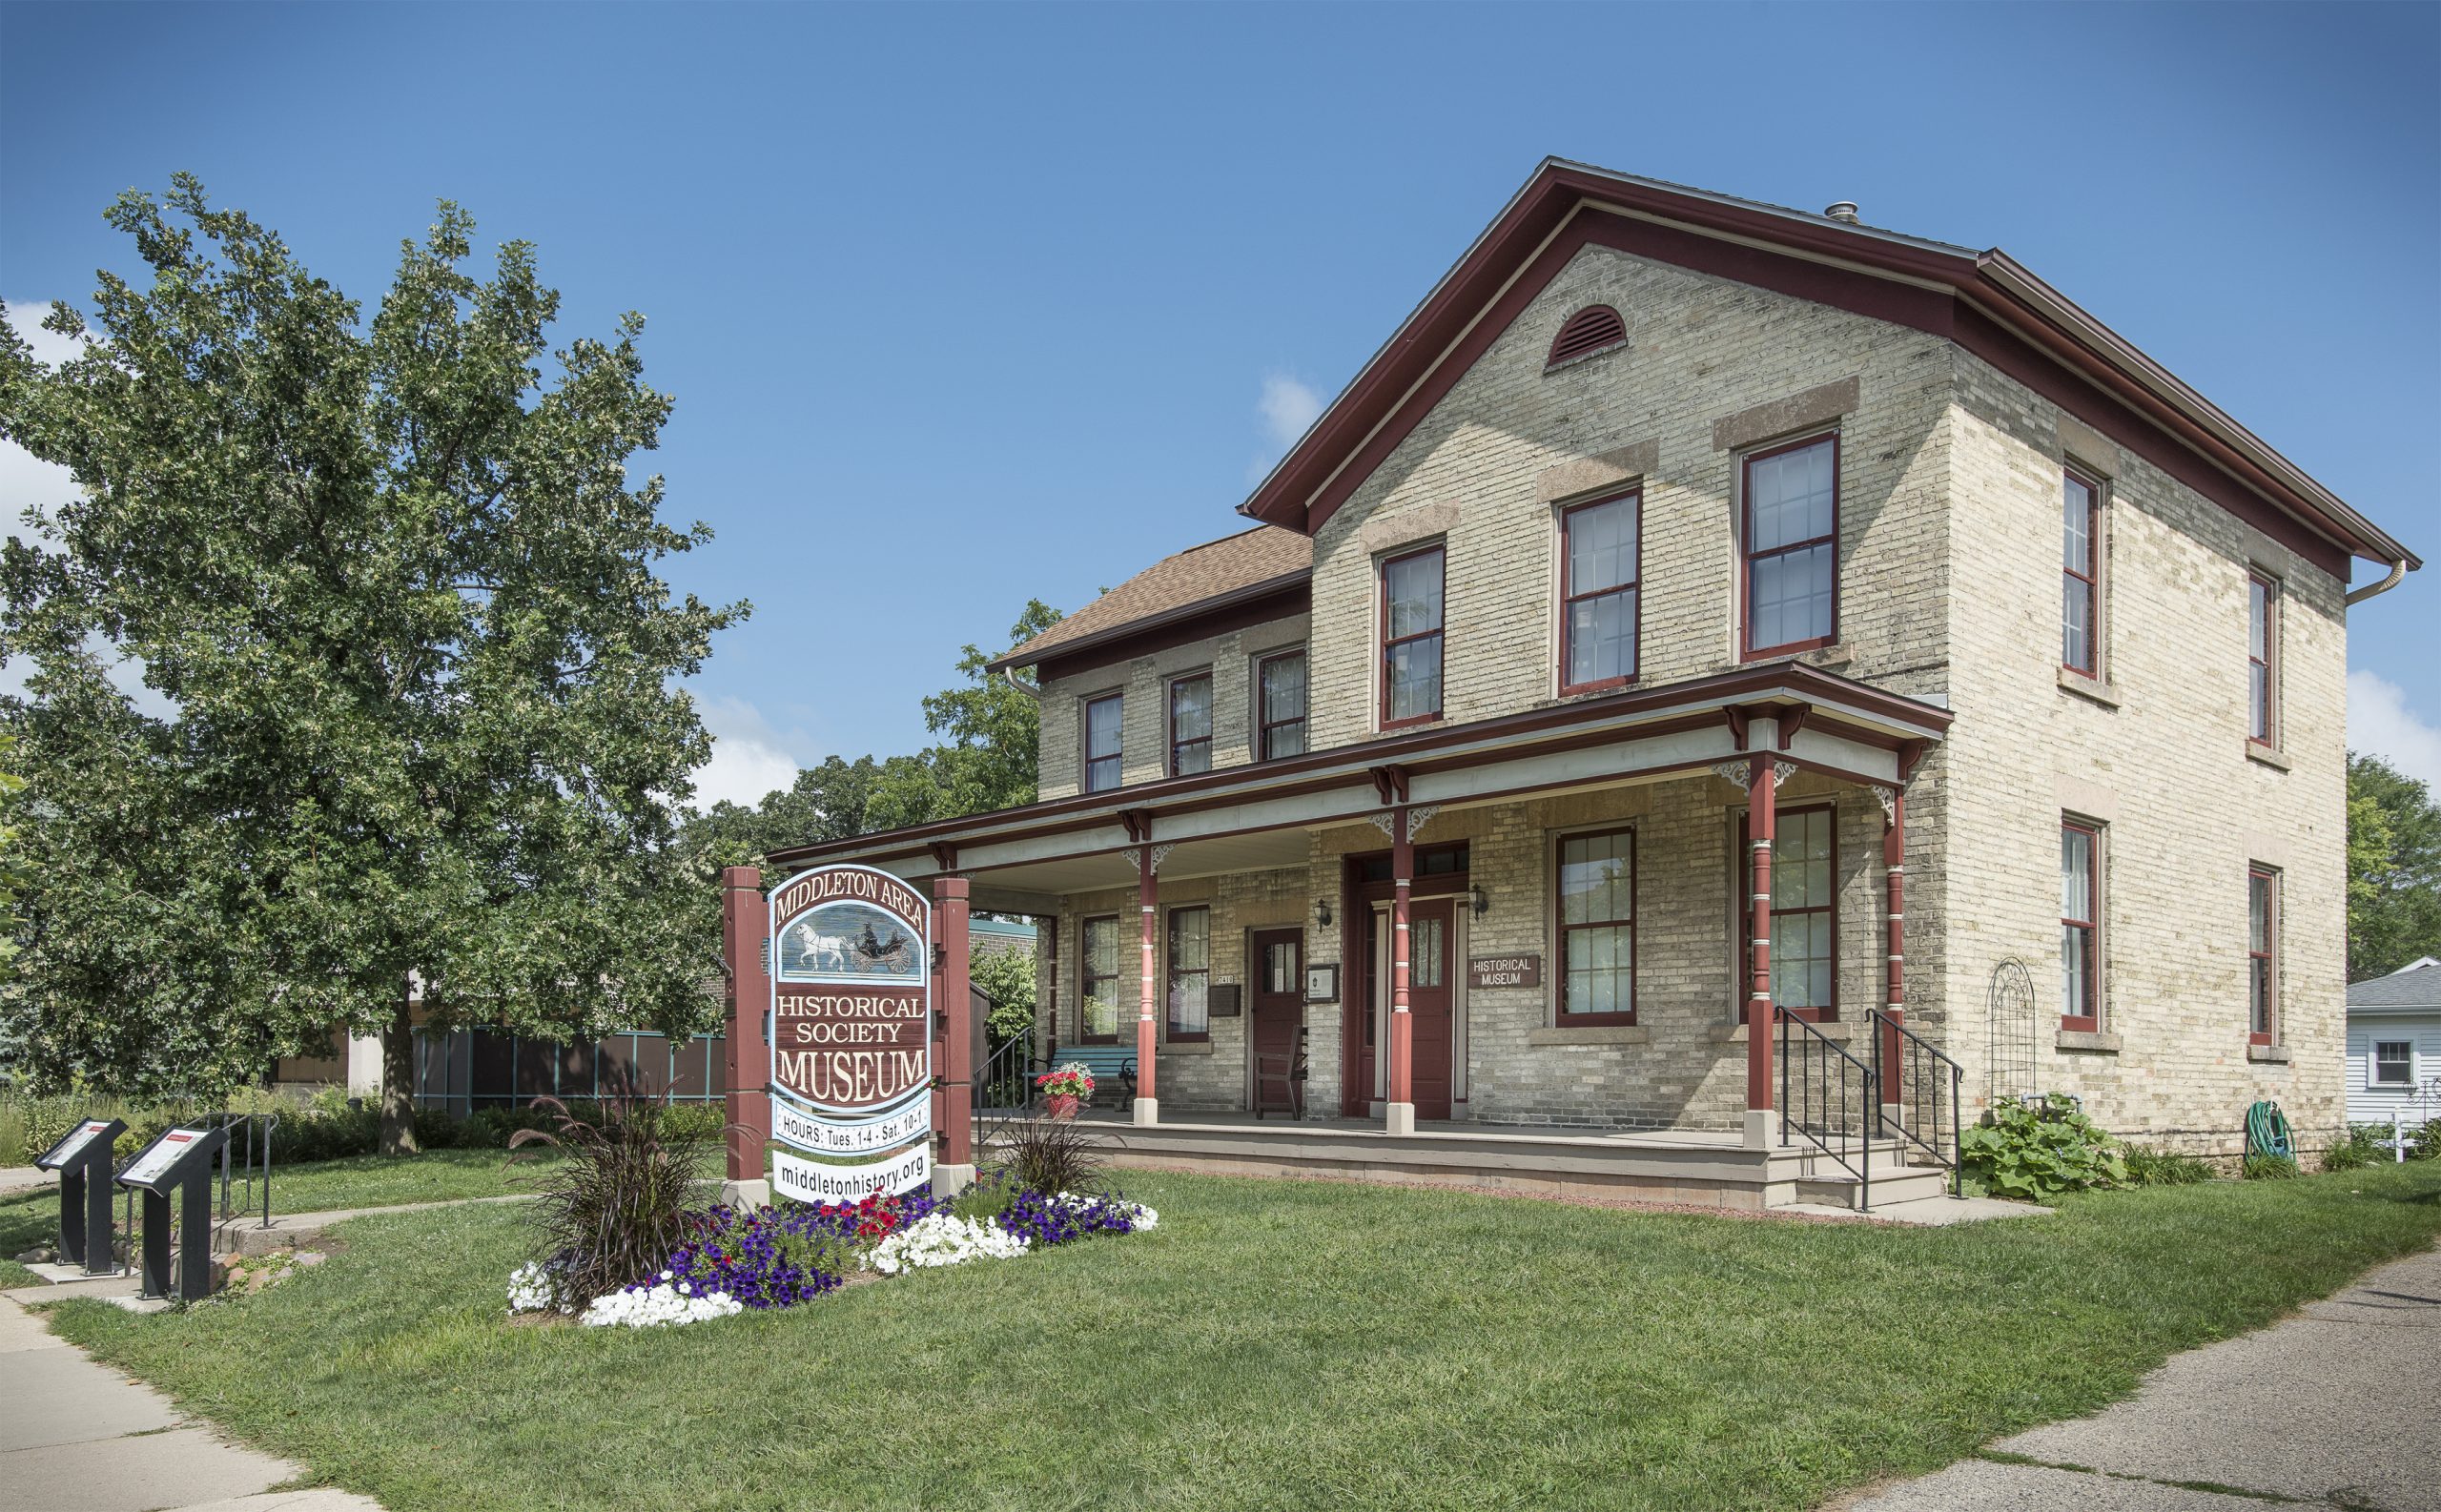 Rowley House Museum, historic building in Middleton, provides tours